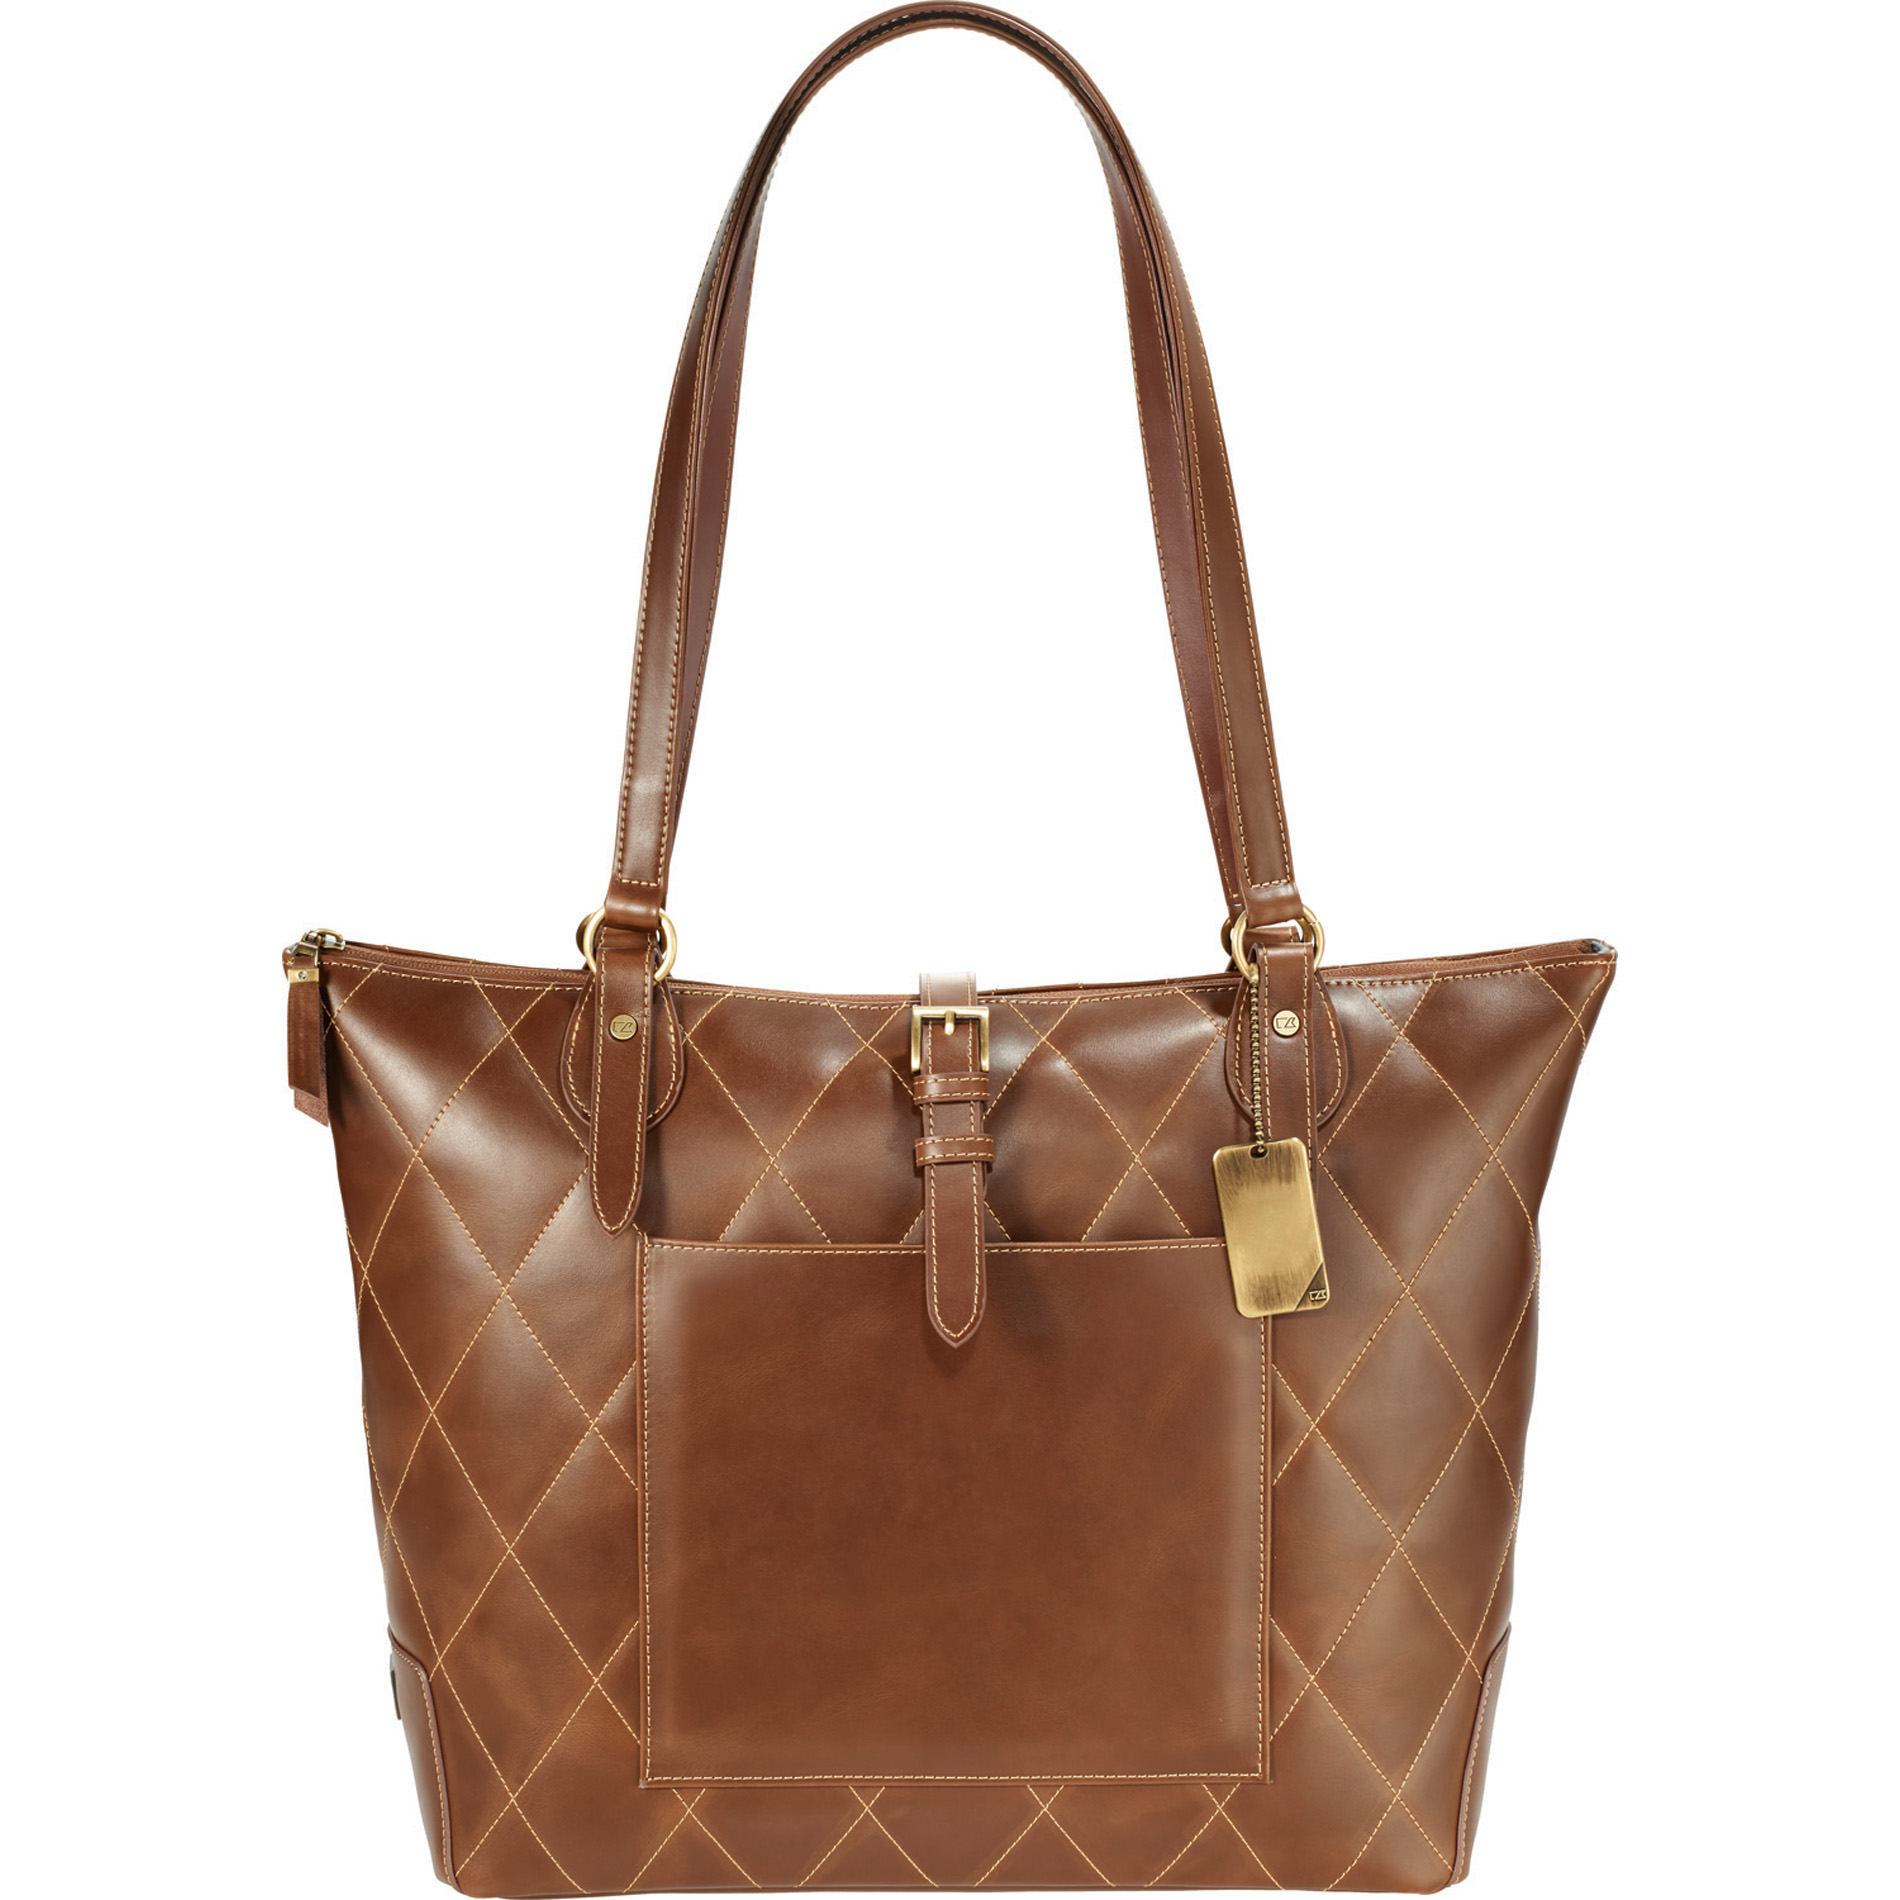 Cutter & Buck 9840-47 - Bainbridge Quilted Leather Tote